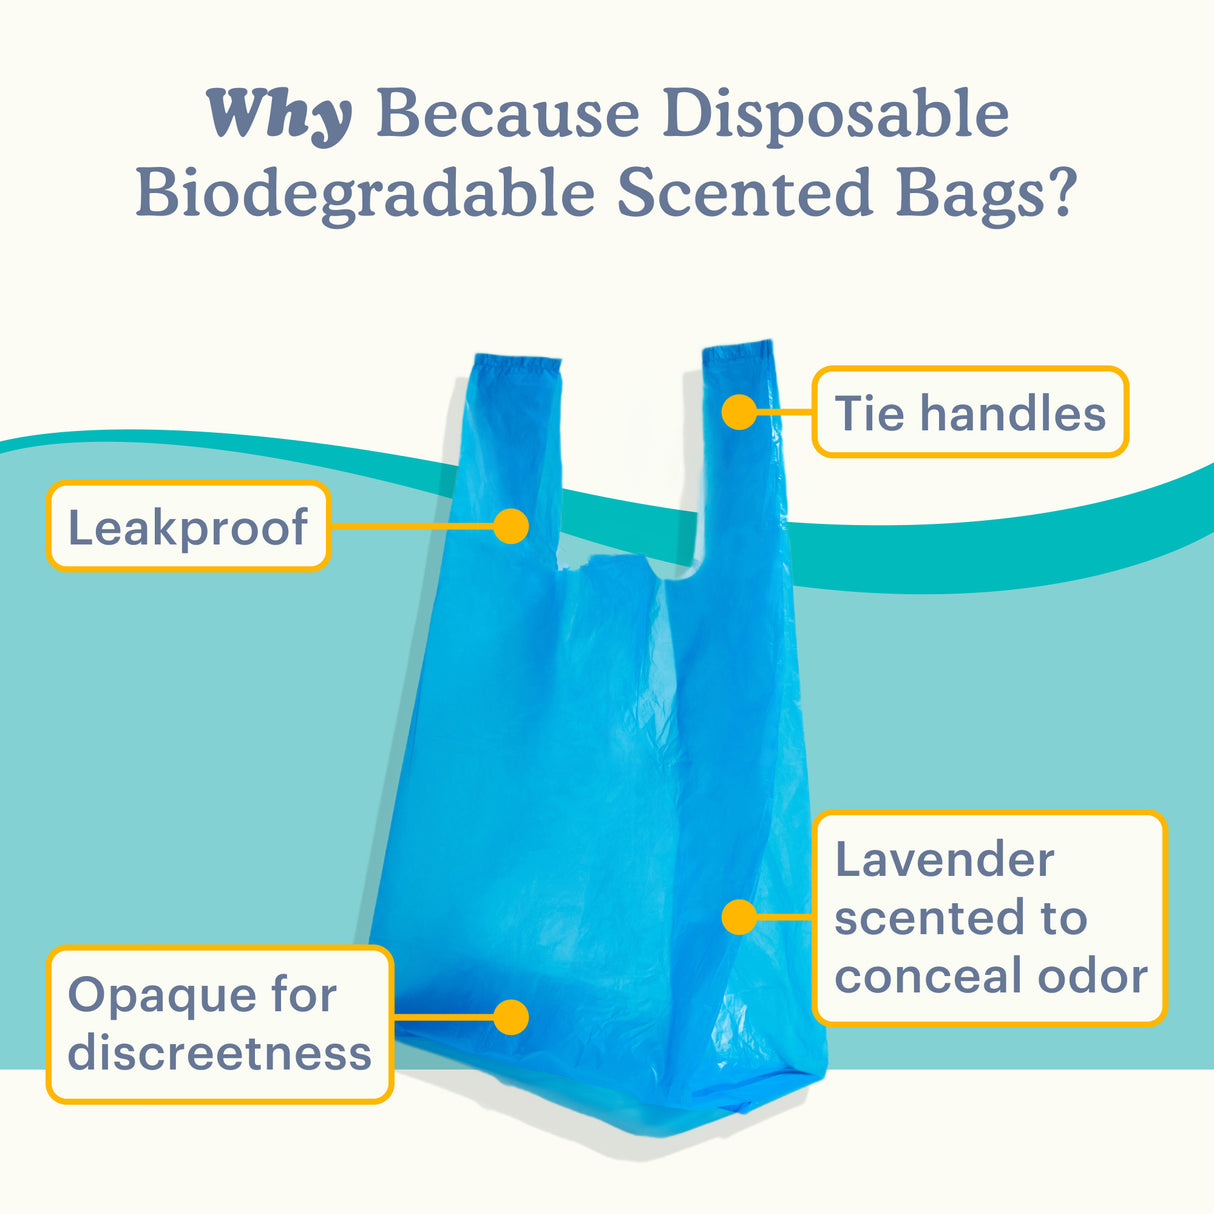 Why choose Because Disposable Biodegradable Scented Bags? It has tie handles, Leakproof, Opaque for discreetness and is Lavender scented to conceal odor.